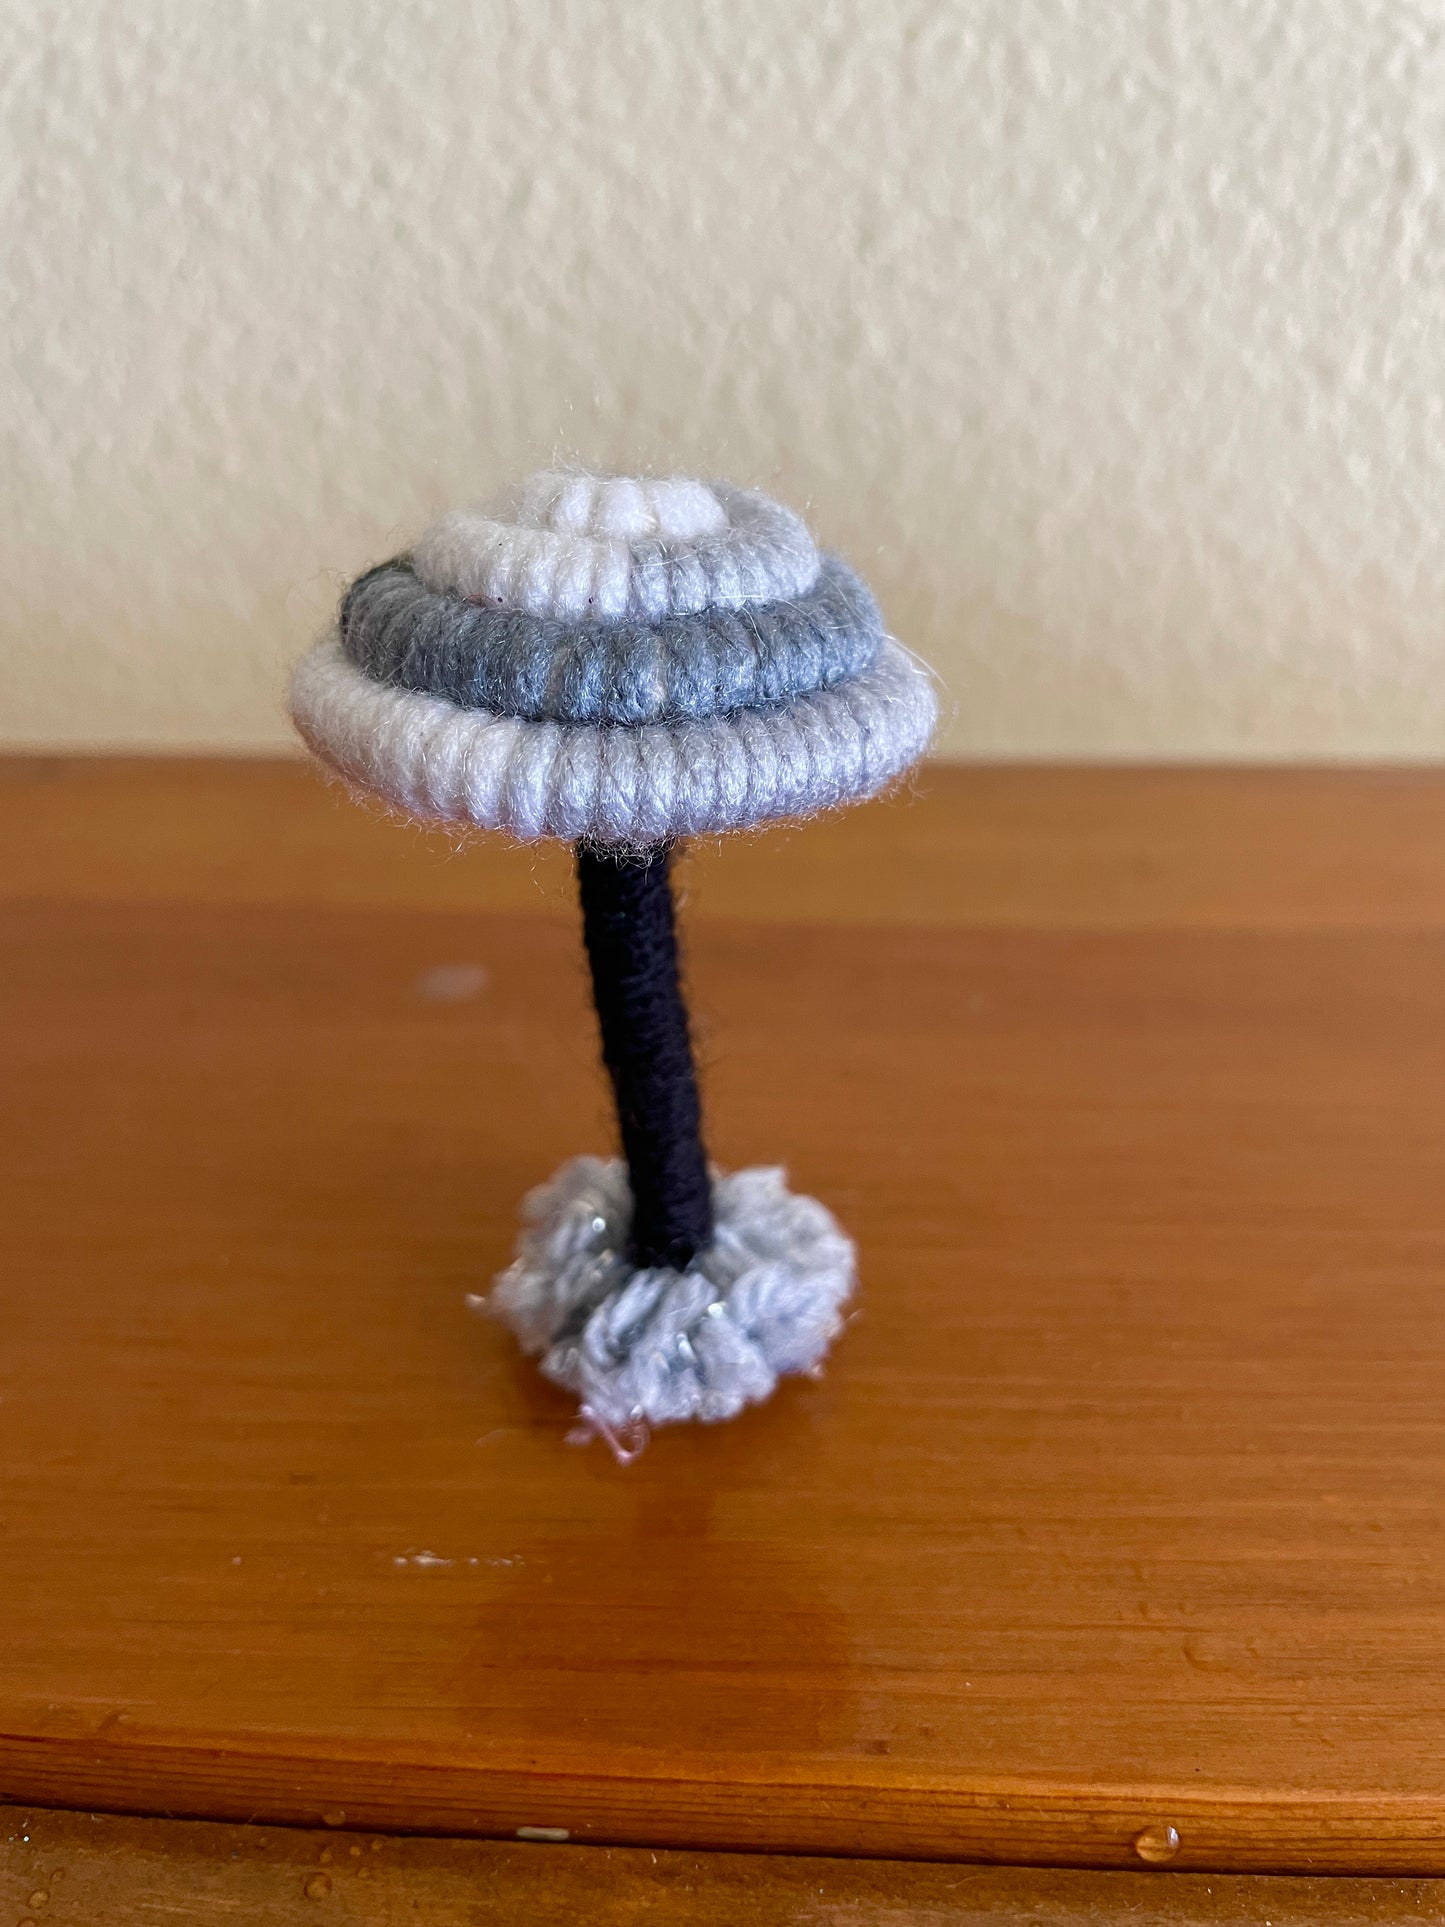 Made with gray black and white yarn wrapped around rope and shaped into a mushroom with small flat platform for standing, perfect for mushroom lovers and or collectors, can also be used as an ornament (hook is included in order)